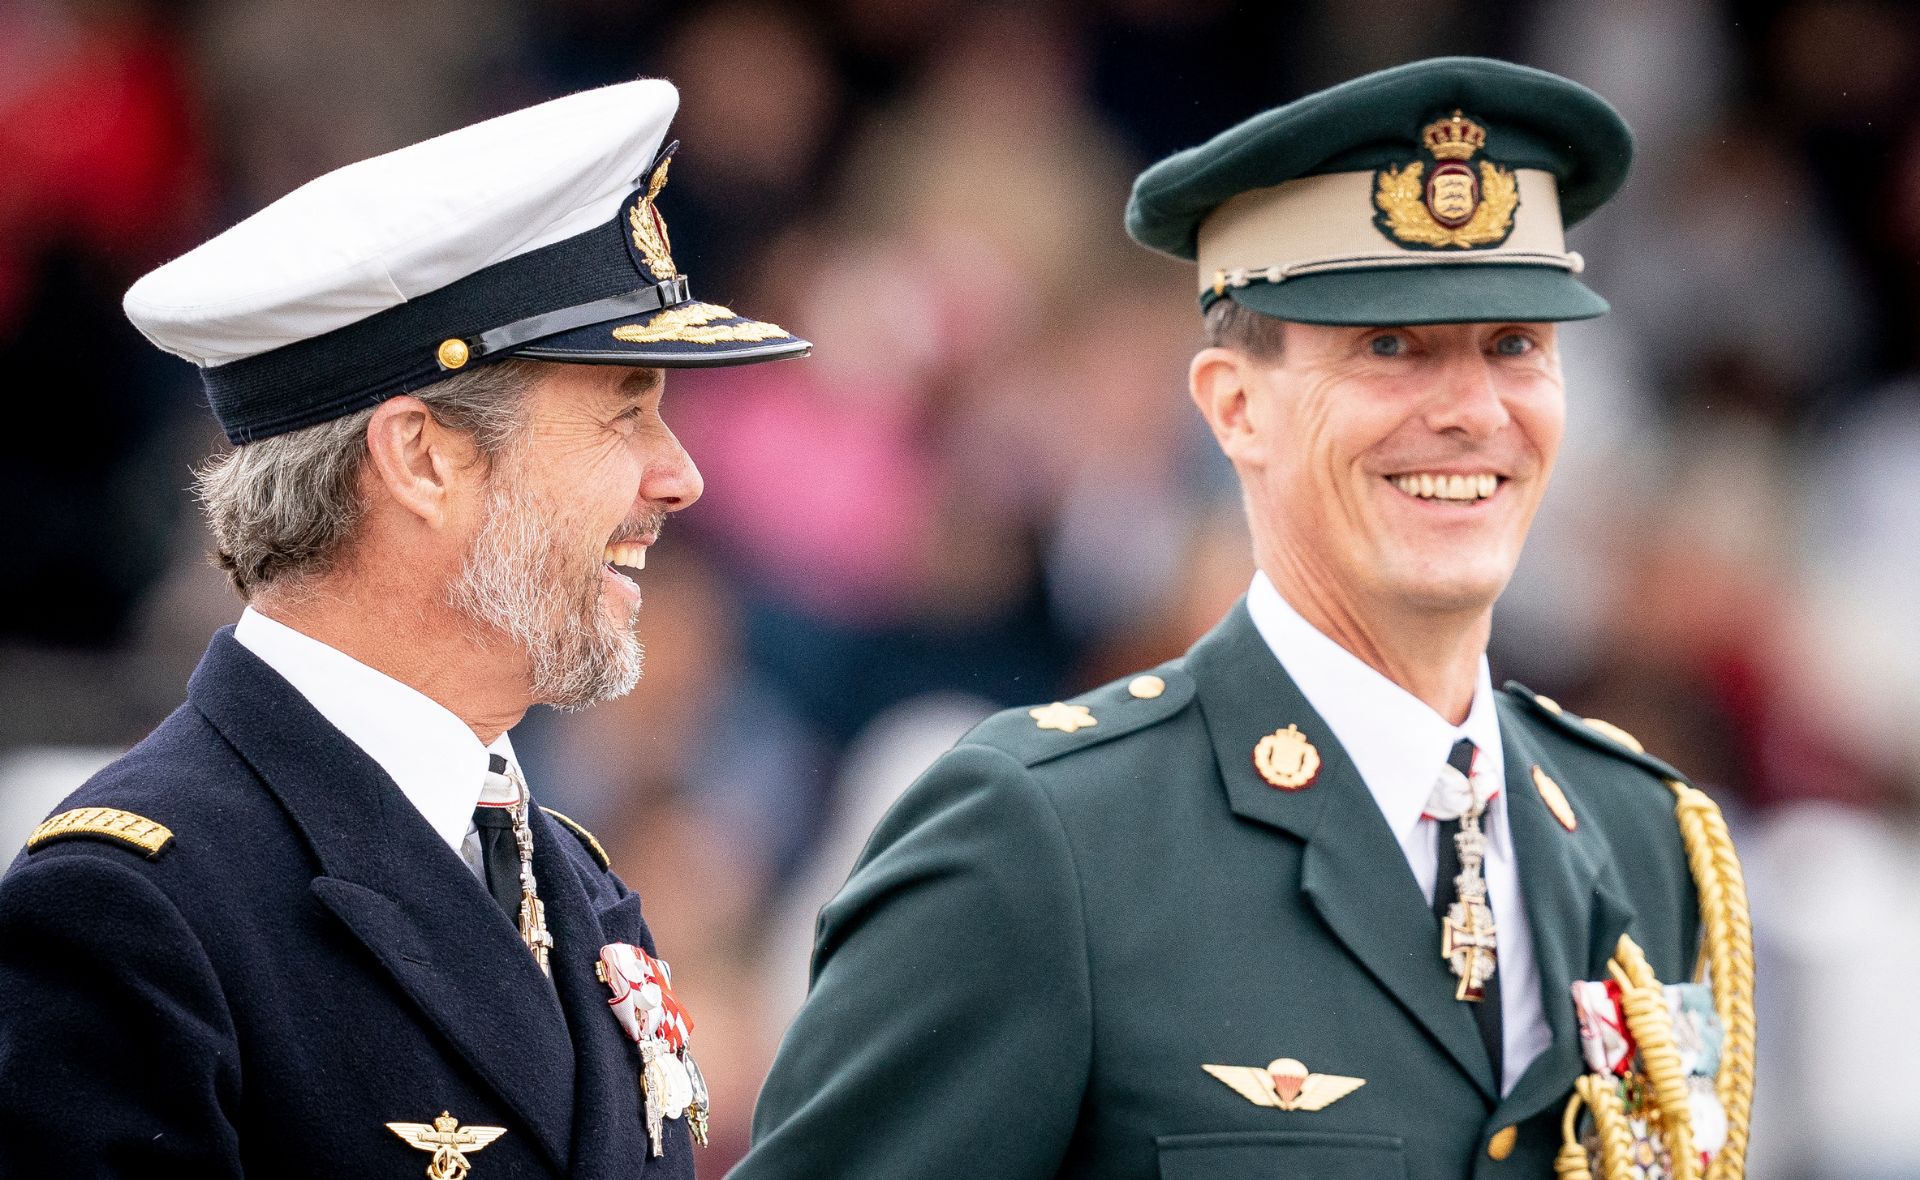 Prince Joachim to attend Prince Frederik and Princess Mary’s ascension to the throne alone